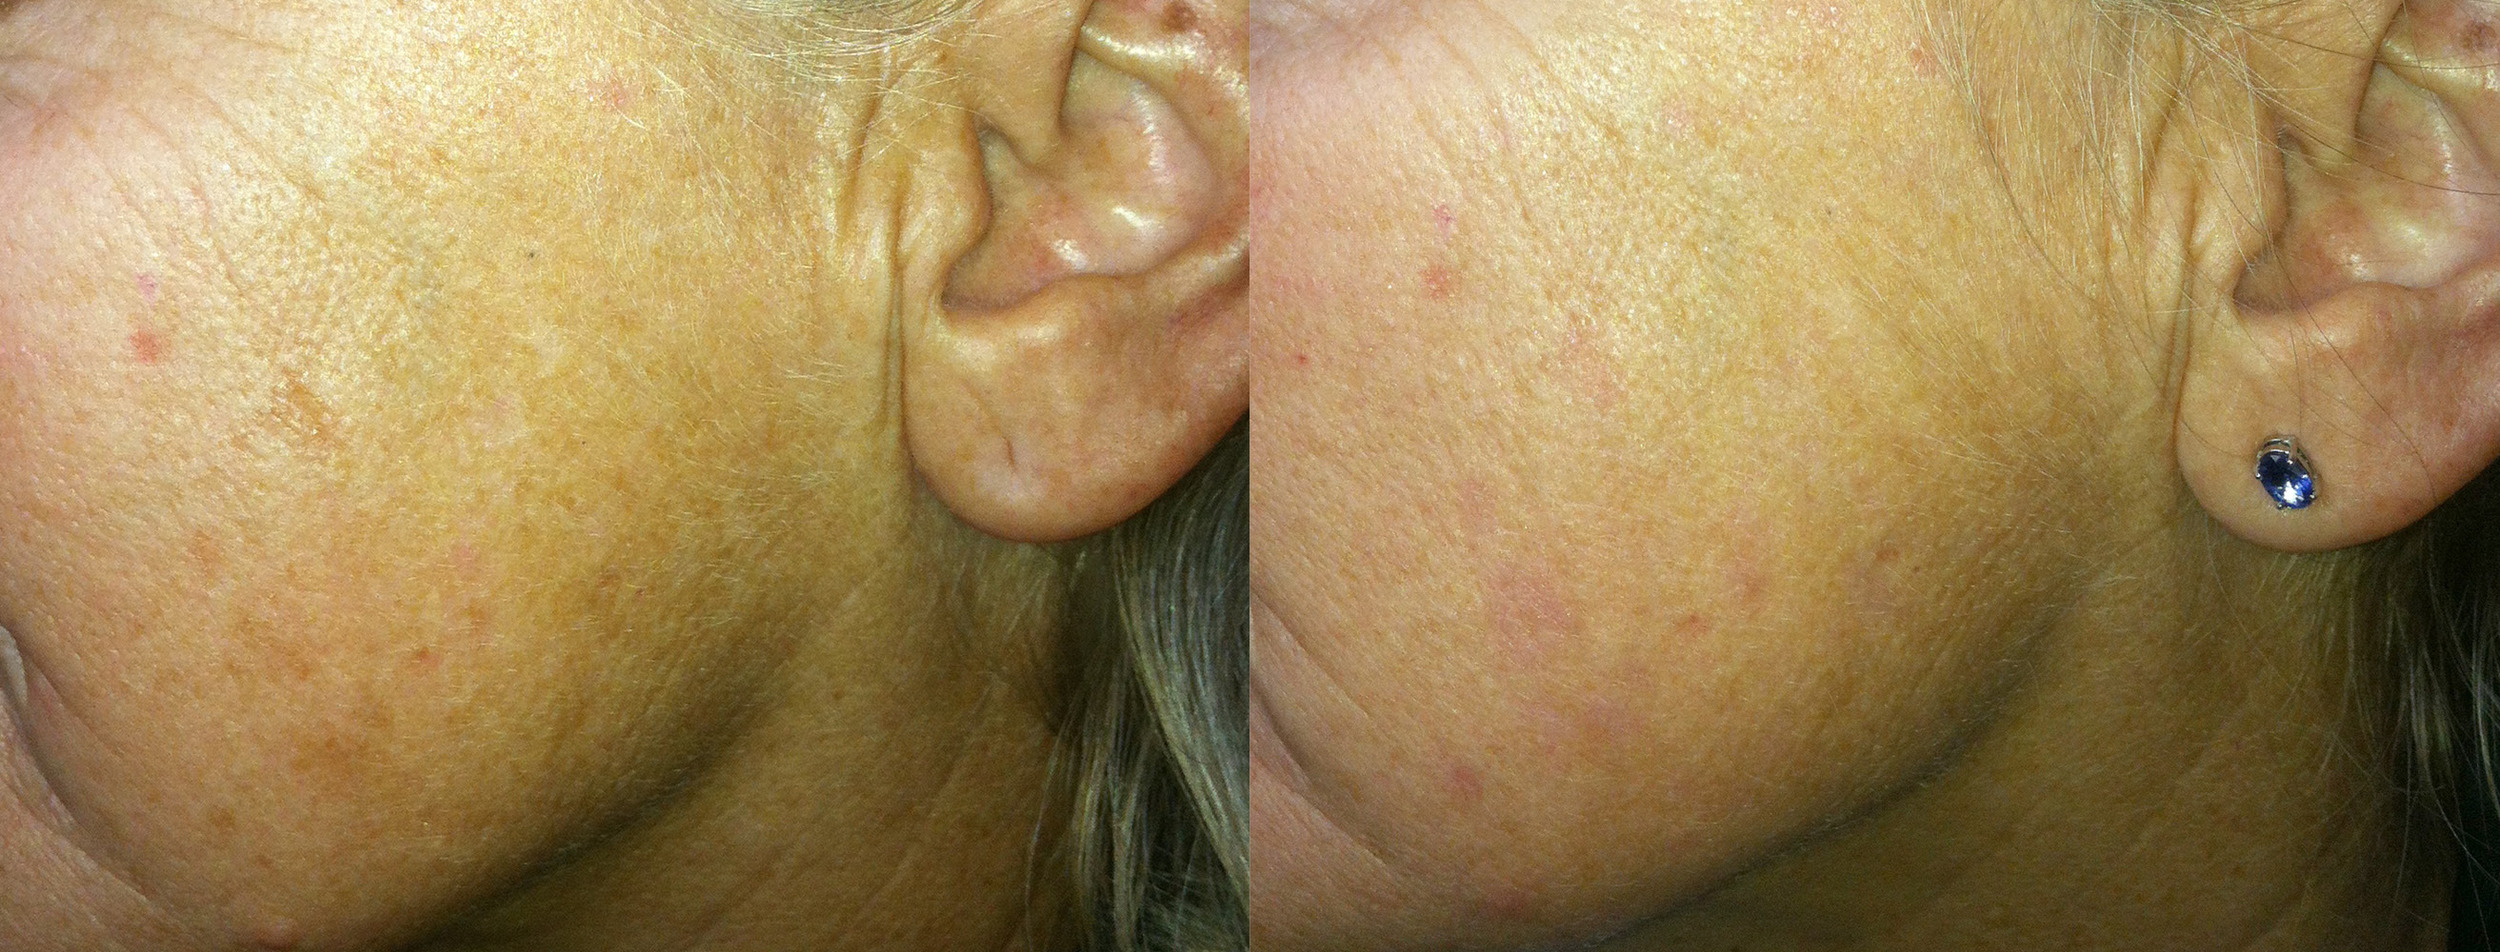  Small age spots removed, one month post treatment. 